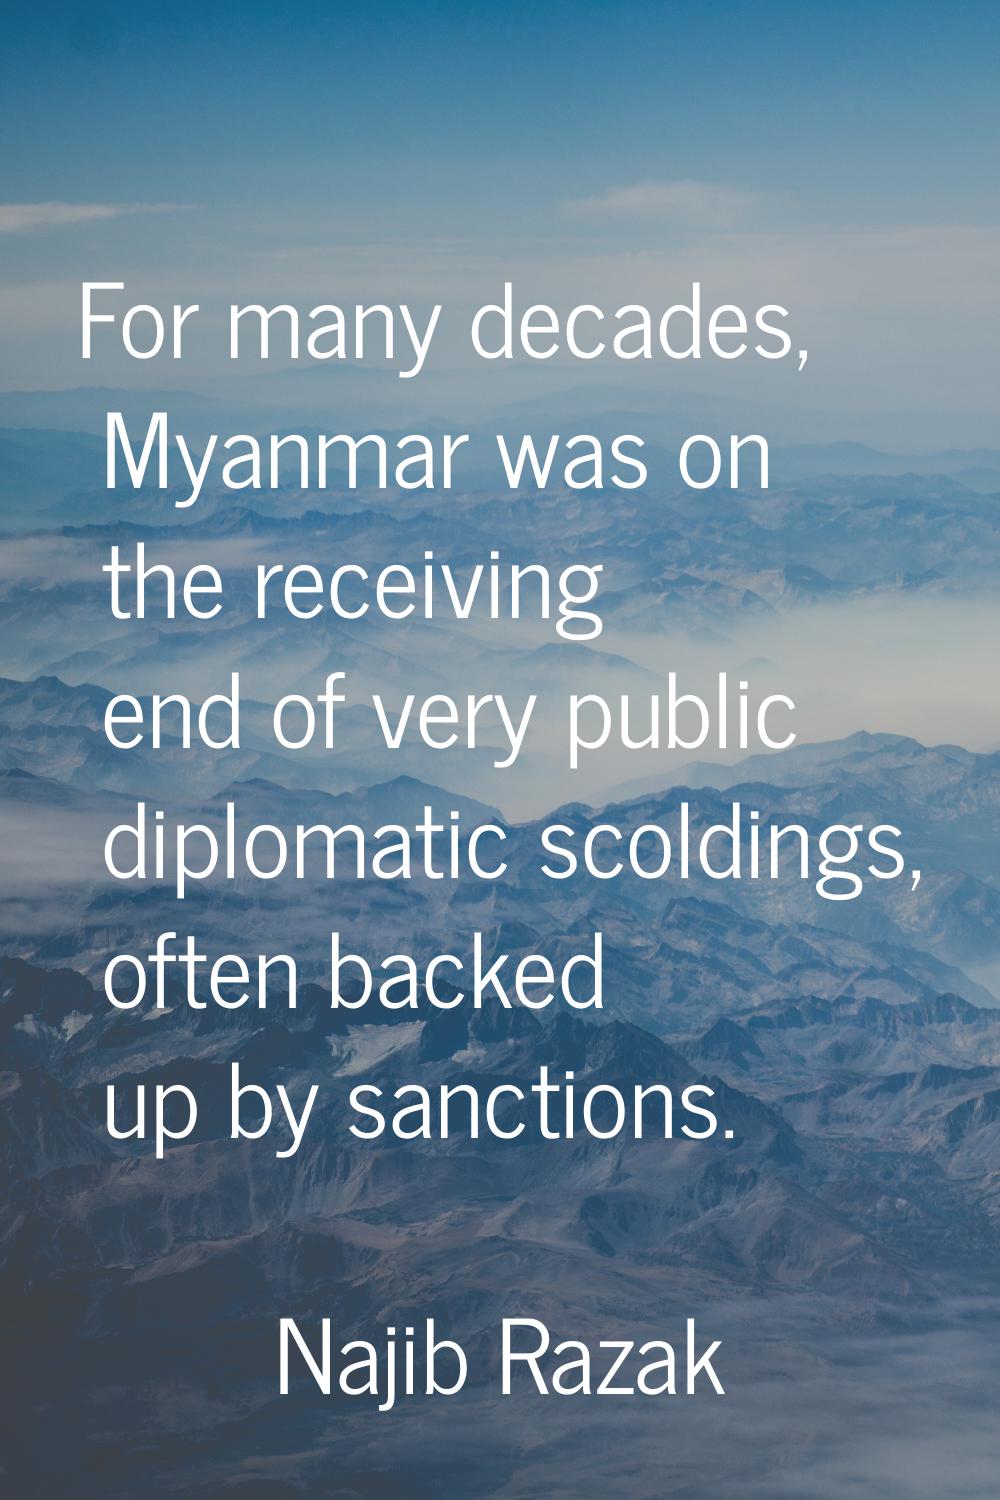 For many decades, Myanmar was on the receiving end of very public diplomatic scoldings, often backe